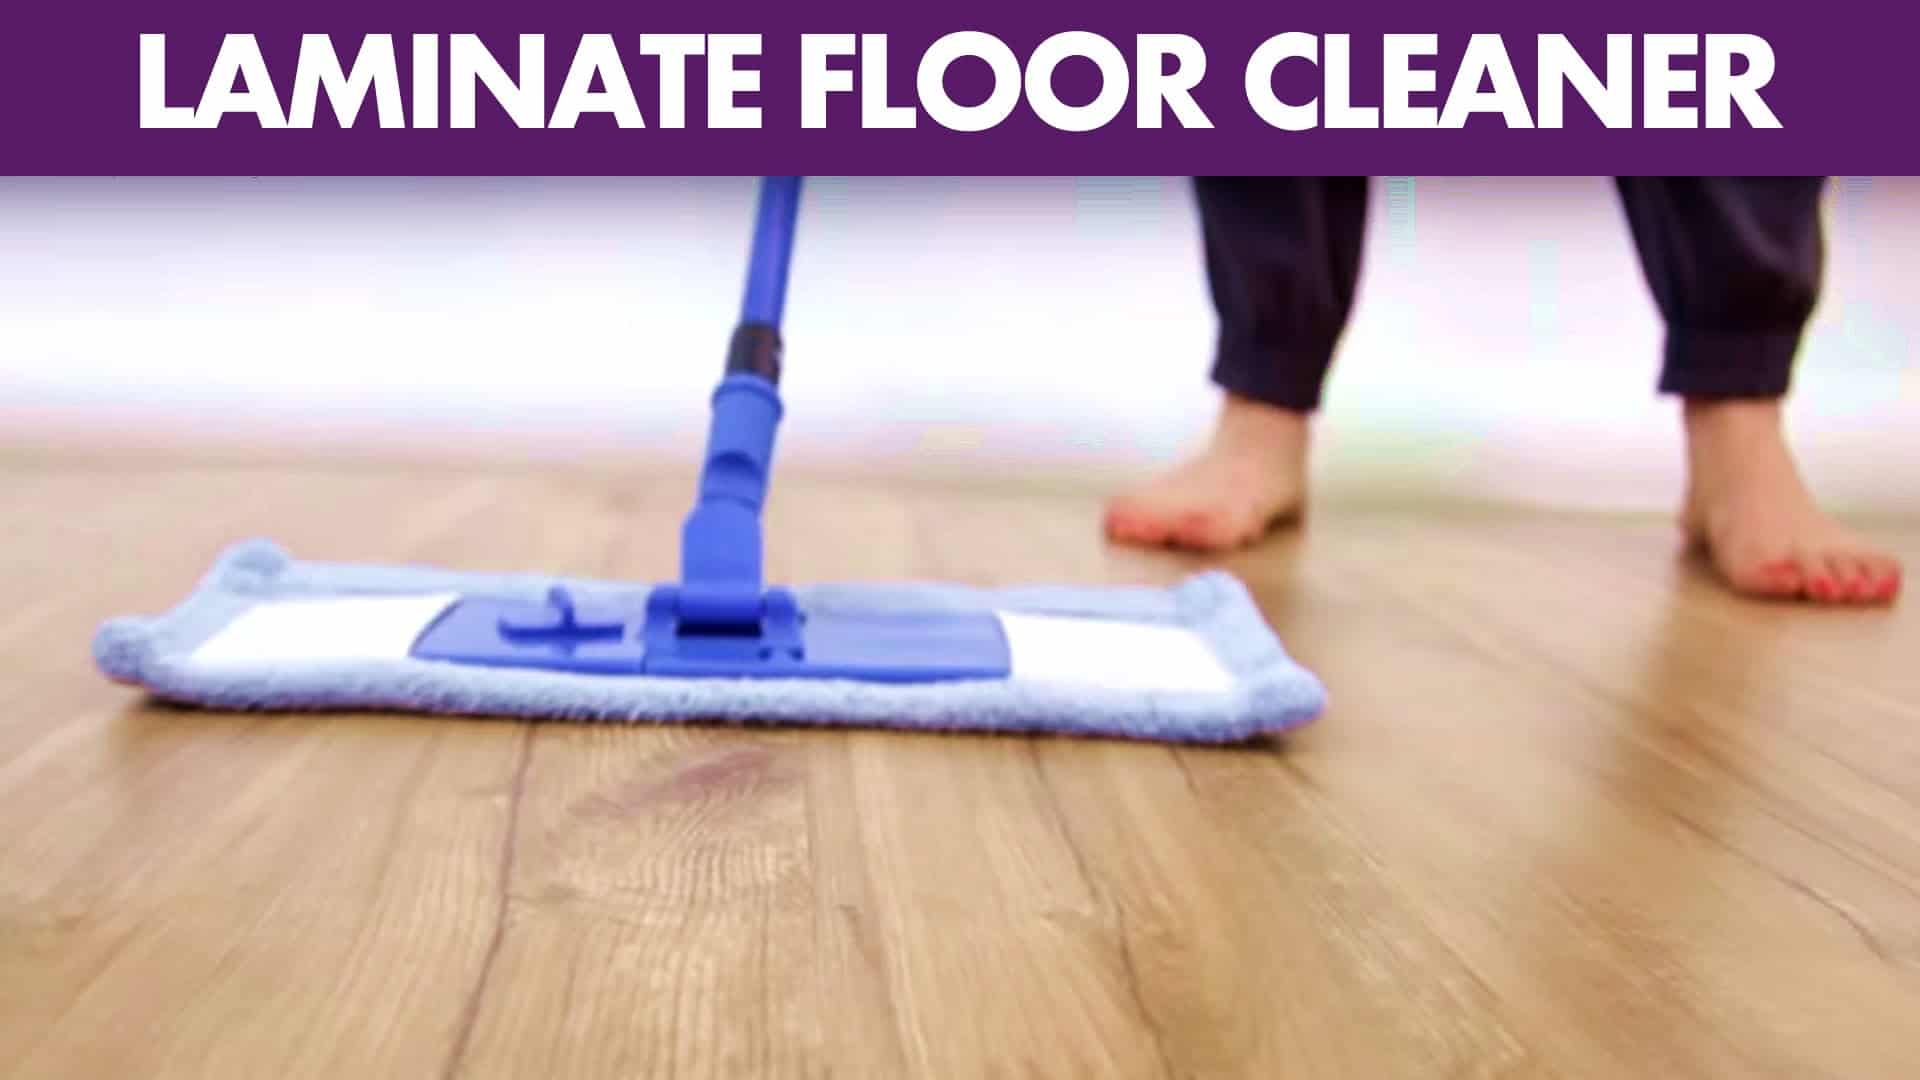 Laminate Floor Cleaner Day 9 31, What Is The Best Way To Clean Laminate Wood Floors